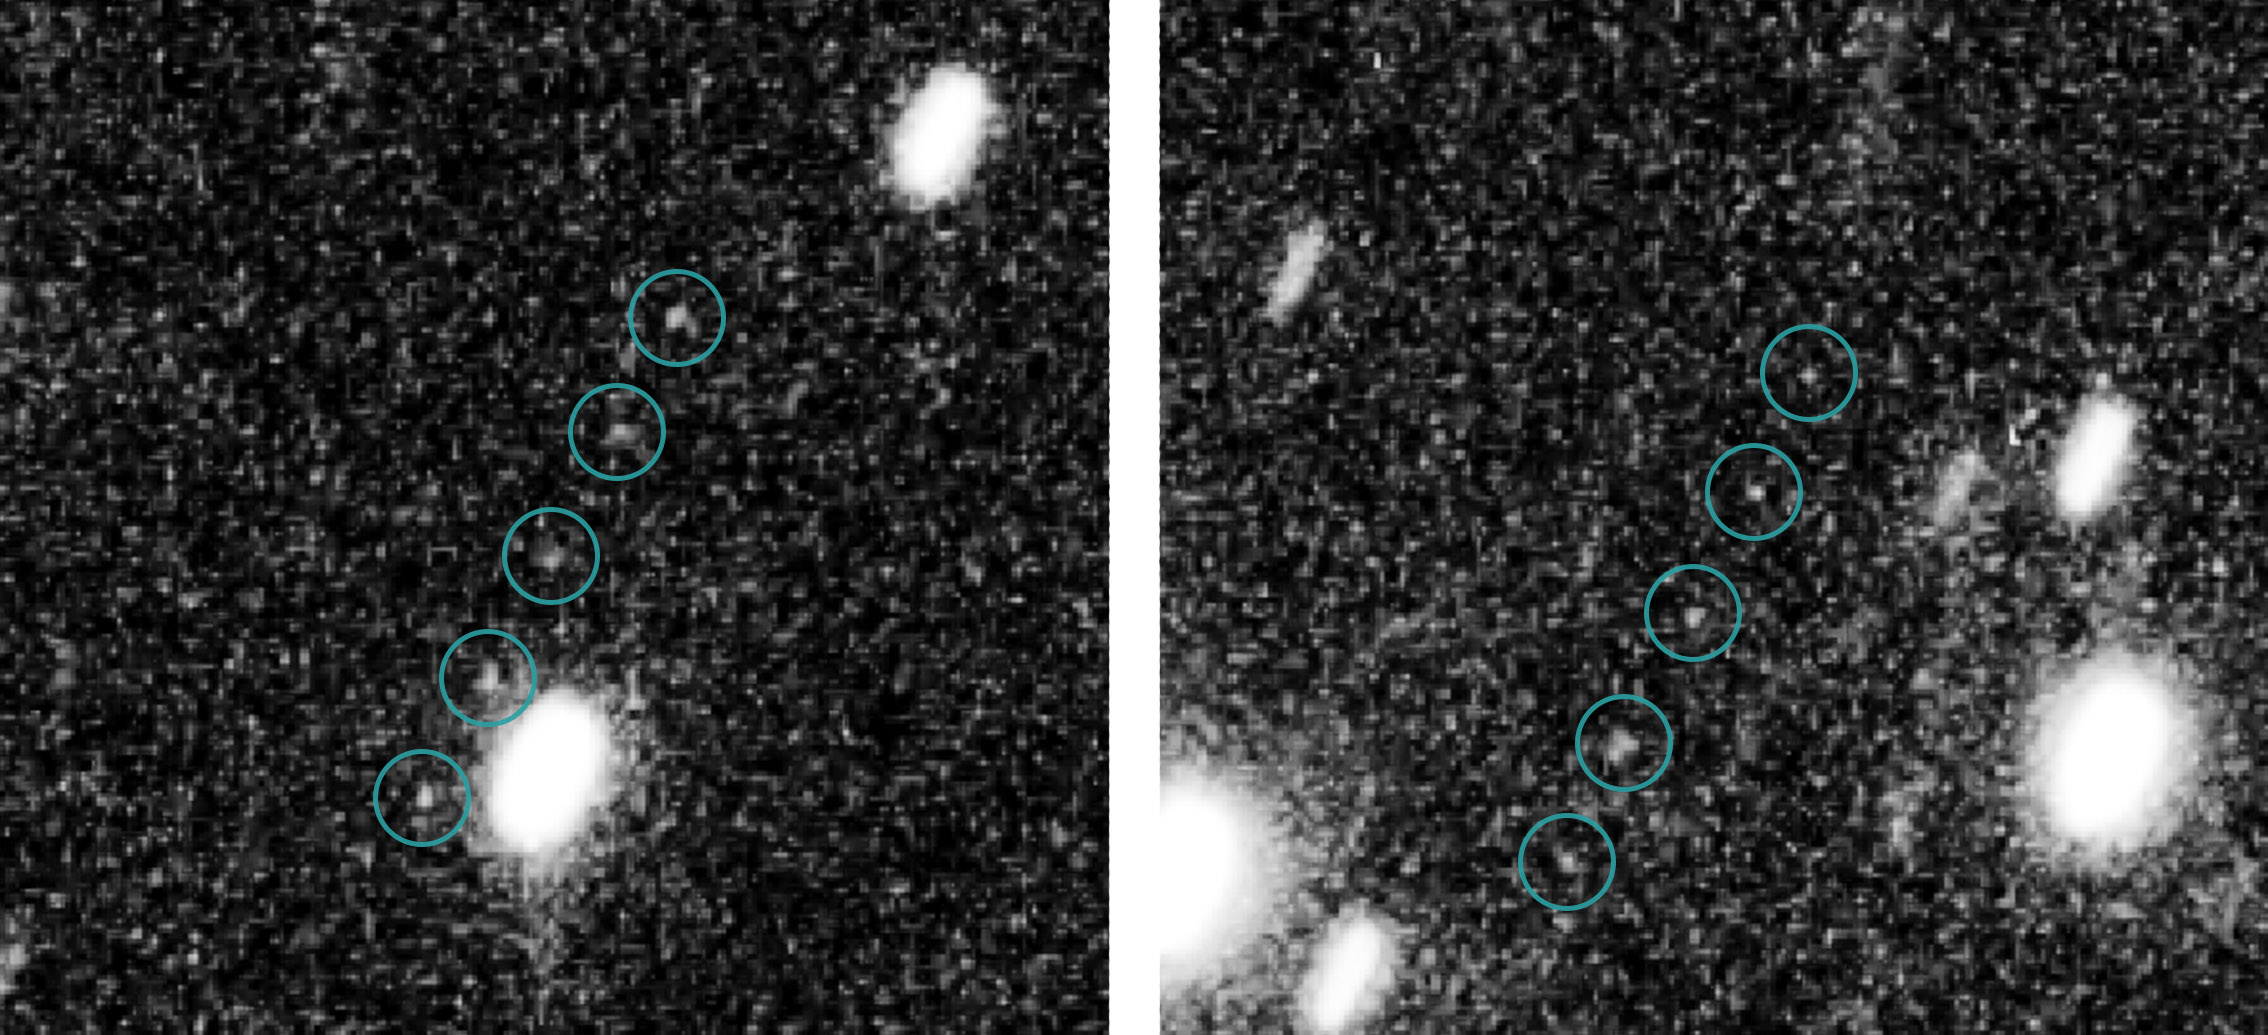 Hubble Images of Kuiper Belt Objects